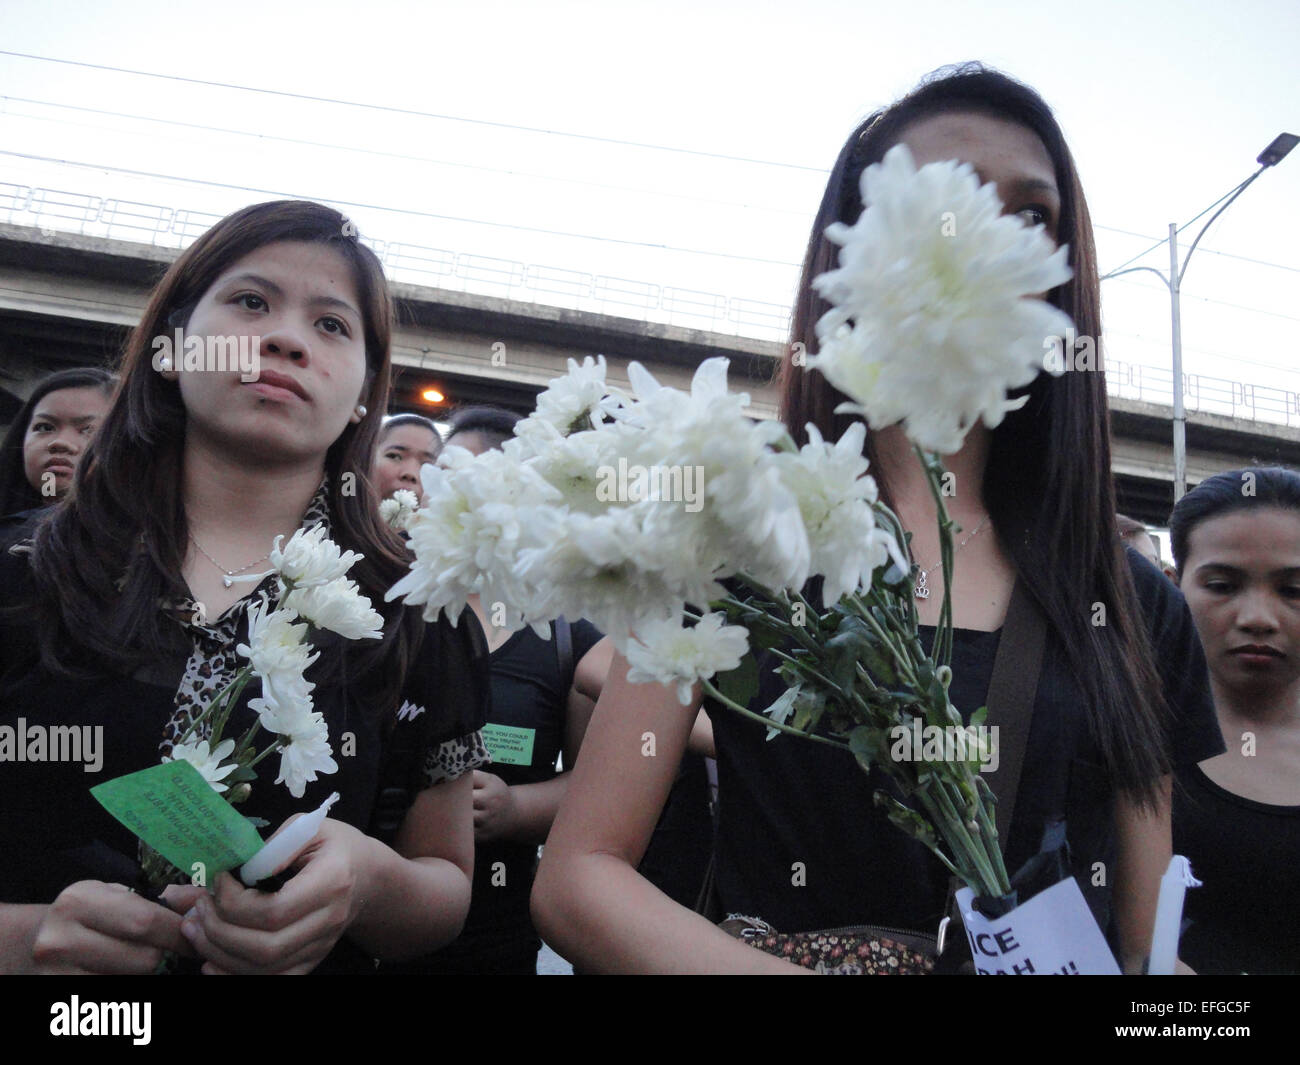 Quezon City, Philippines. 3rd Feb, 2015. Women dressed in black hold flowers tied with messages calling for justice outside the Philippine National Police headquarters. A mass was celebrated outside the Philippine National Police headquarters as they called for truth and accountability for the casualties of the botched anti-terror operation in Mamasapano, Maguindanao provionce last January 25, including 44 police commandos, as well as several civilians. Credit:  Richard James Mendoza/Pacific Press/Alamy Live News Stock Photo